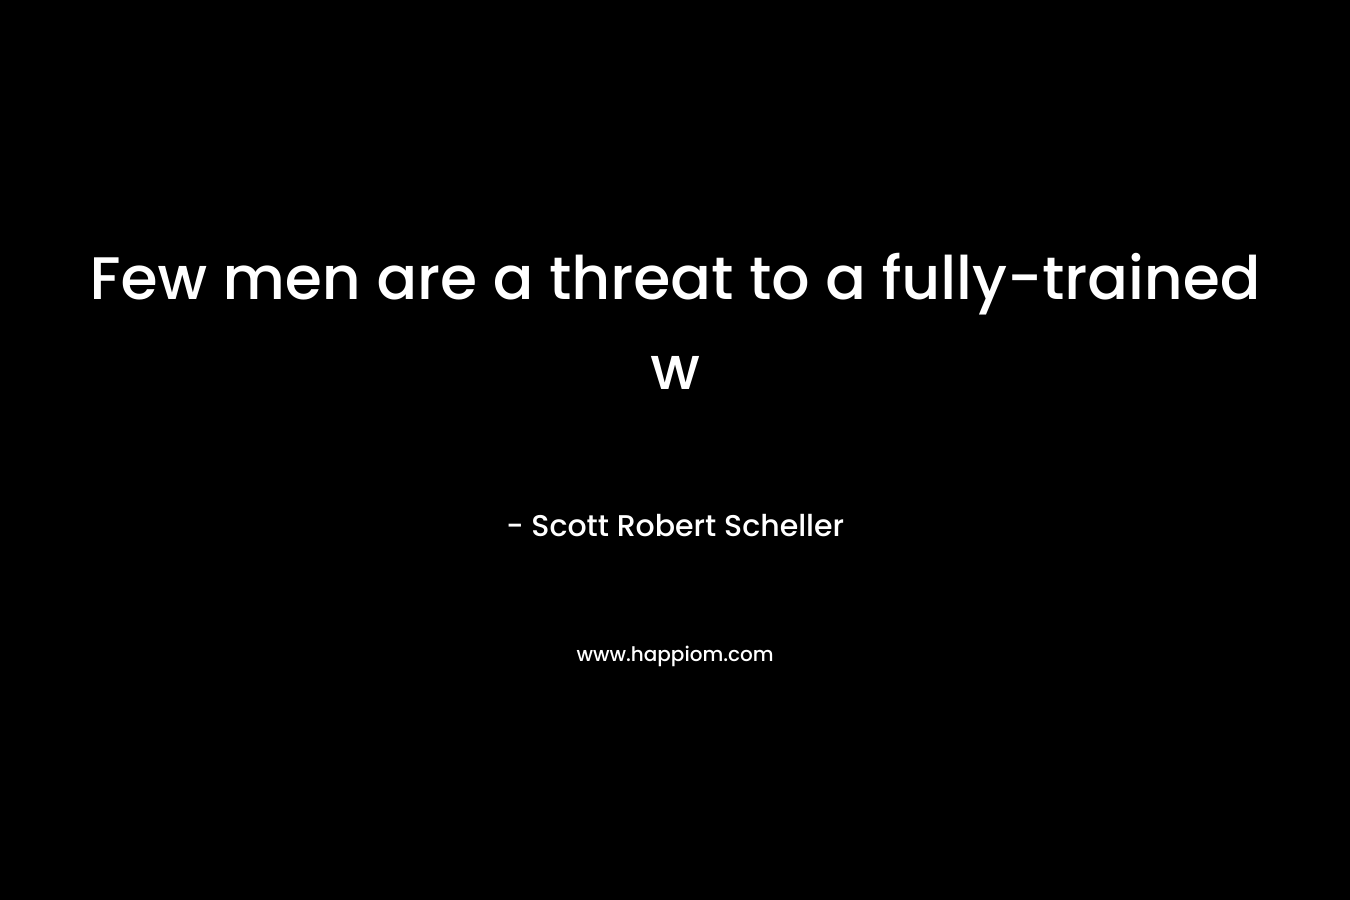 Few men are a threat to a fully-trained w